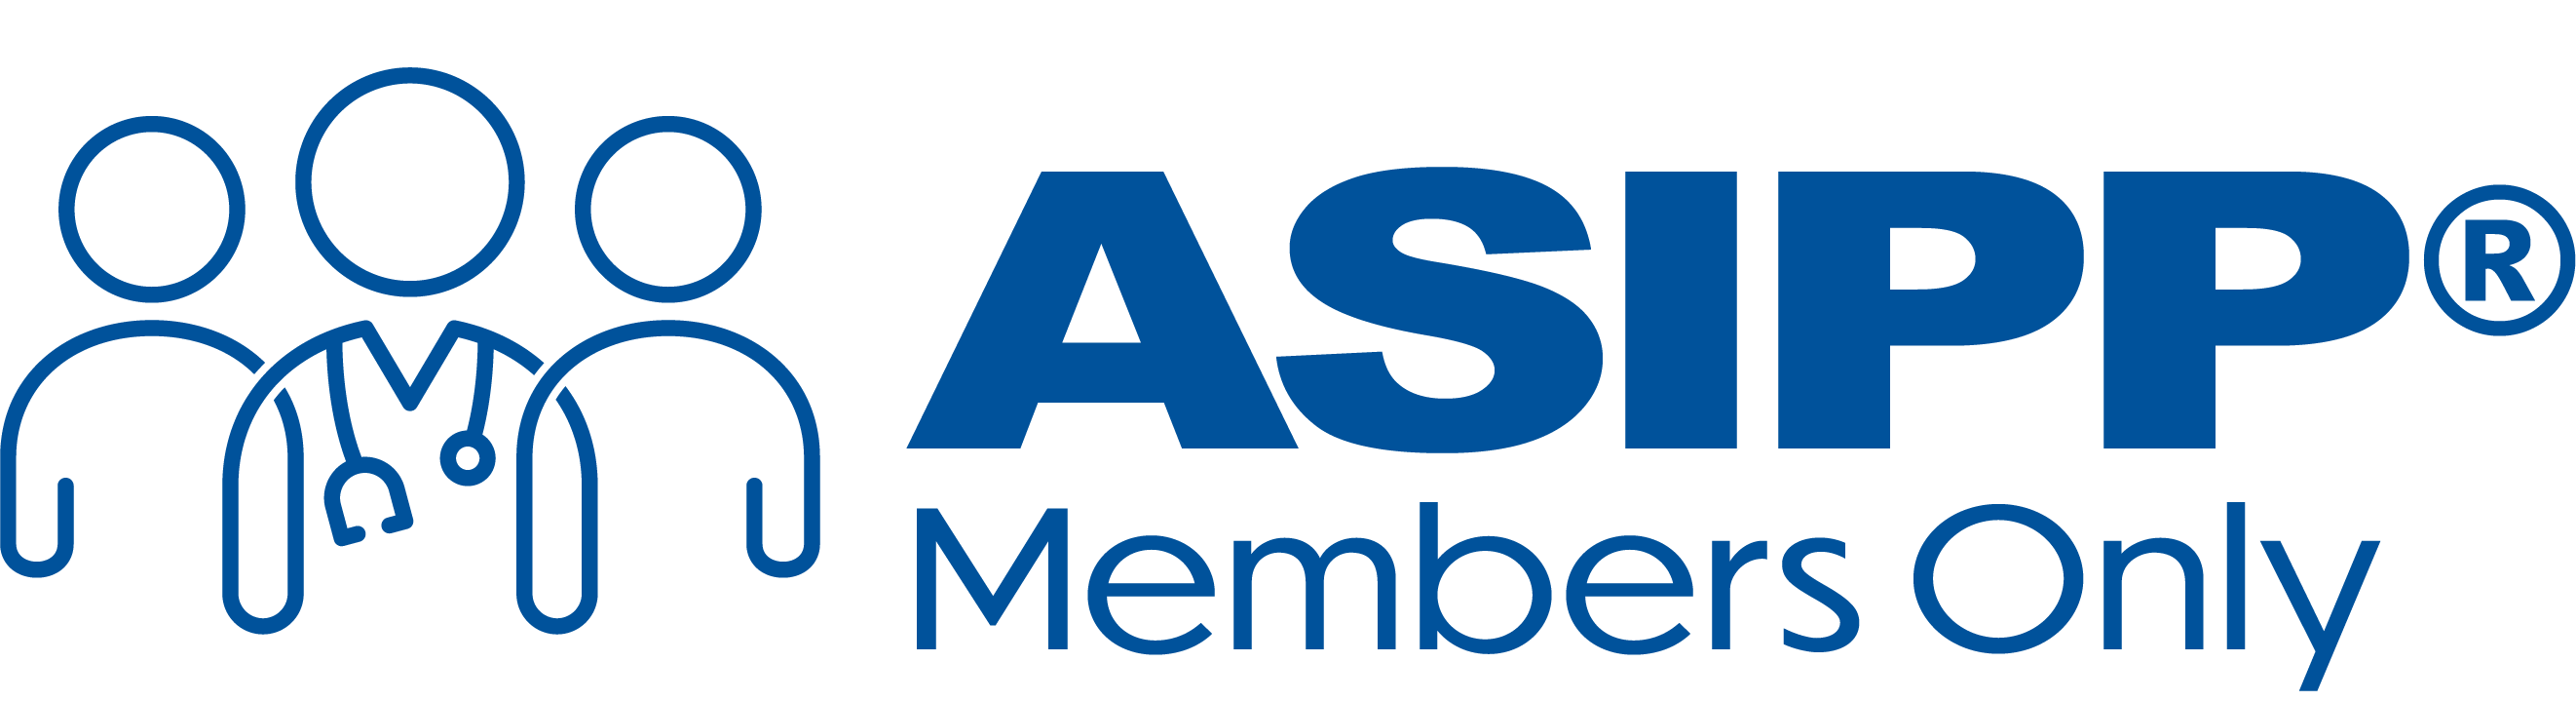 https://asipp.org/wp-content/uploads/ASIPP_Members_Only_logo_blue-1-1-1.png